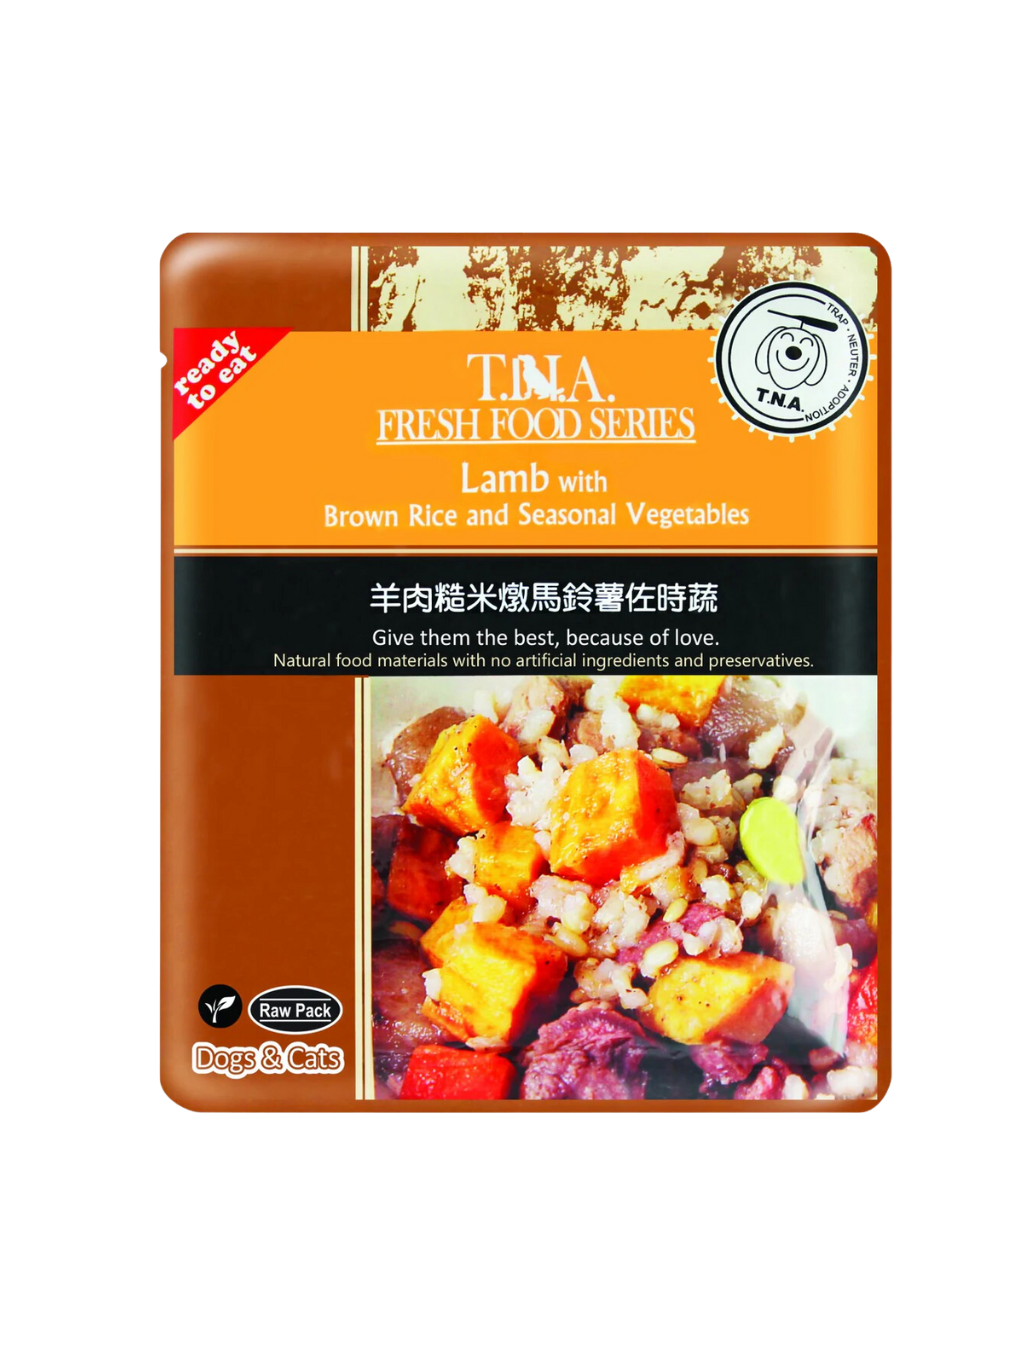 TNA l Youyou meal package series New Zealand lamb stewed with brown rice and potatoes with seasonal vegetables 150g